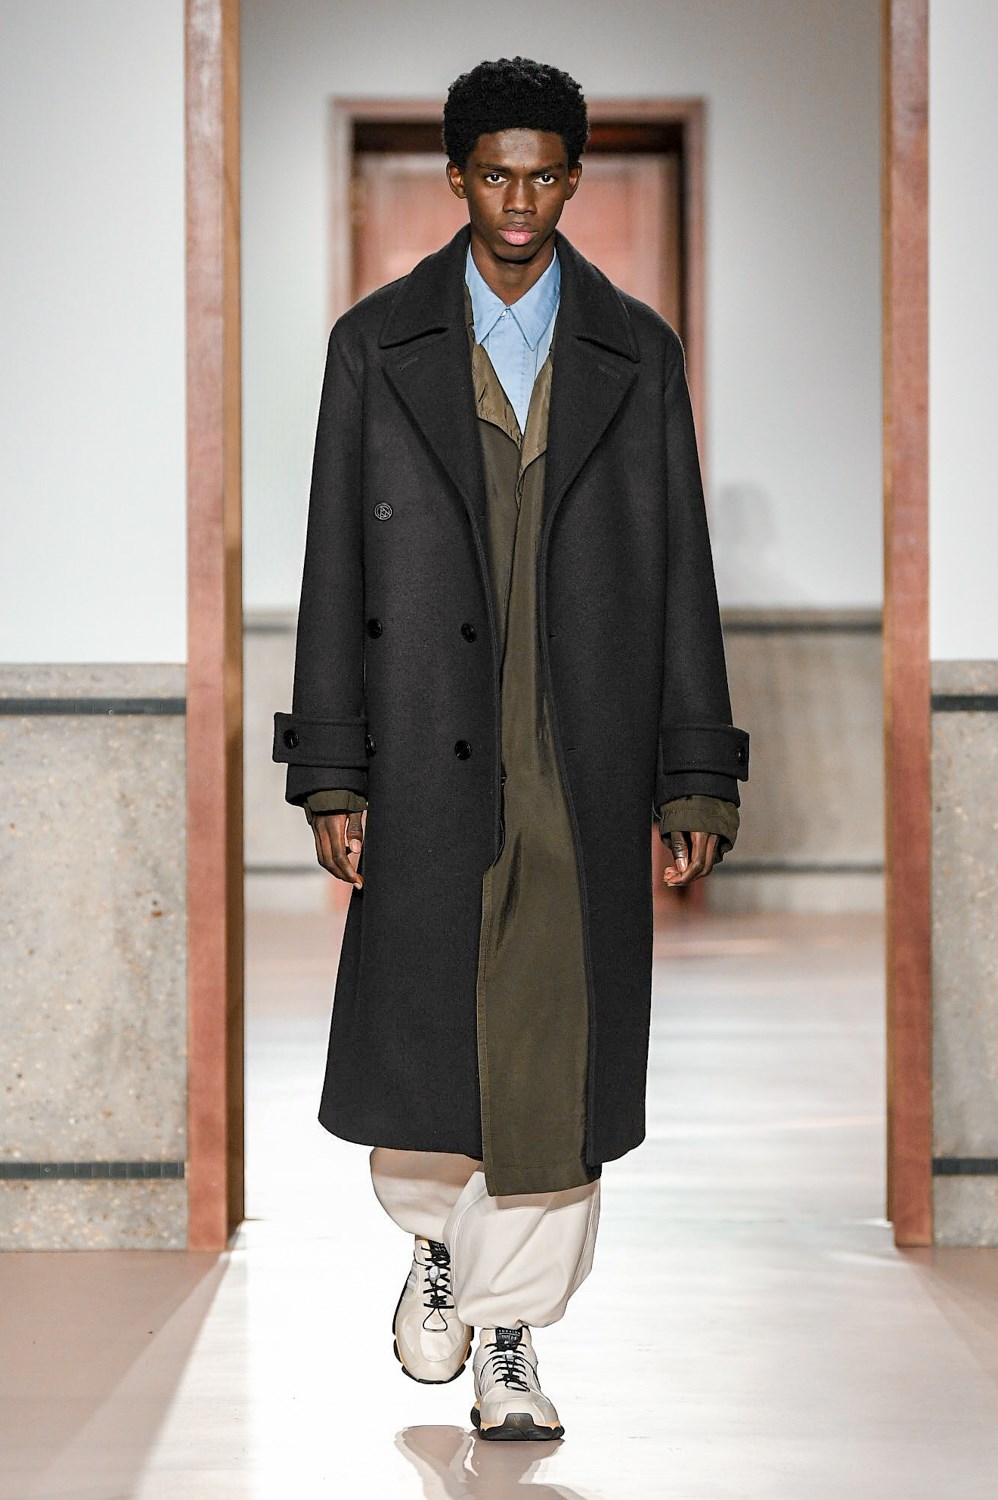 Top 10 Menswear Models of Fall 2020 Fashion Shows | The Impression